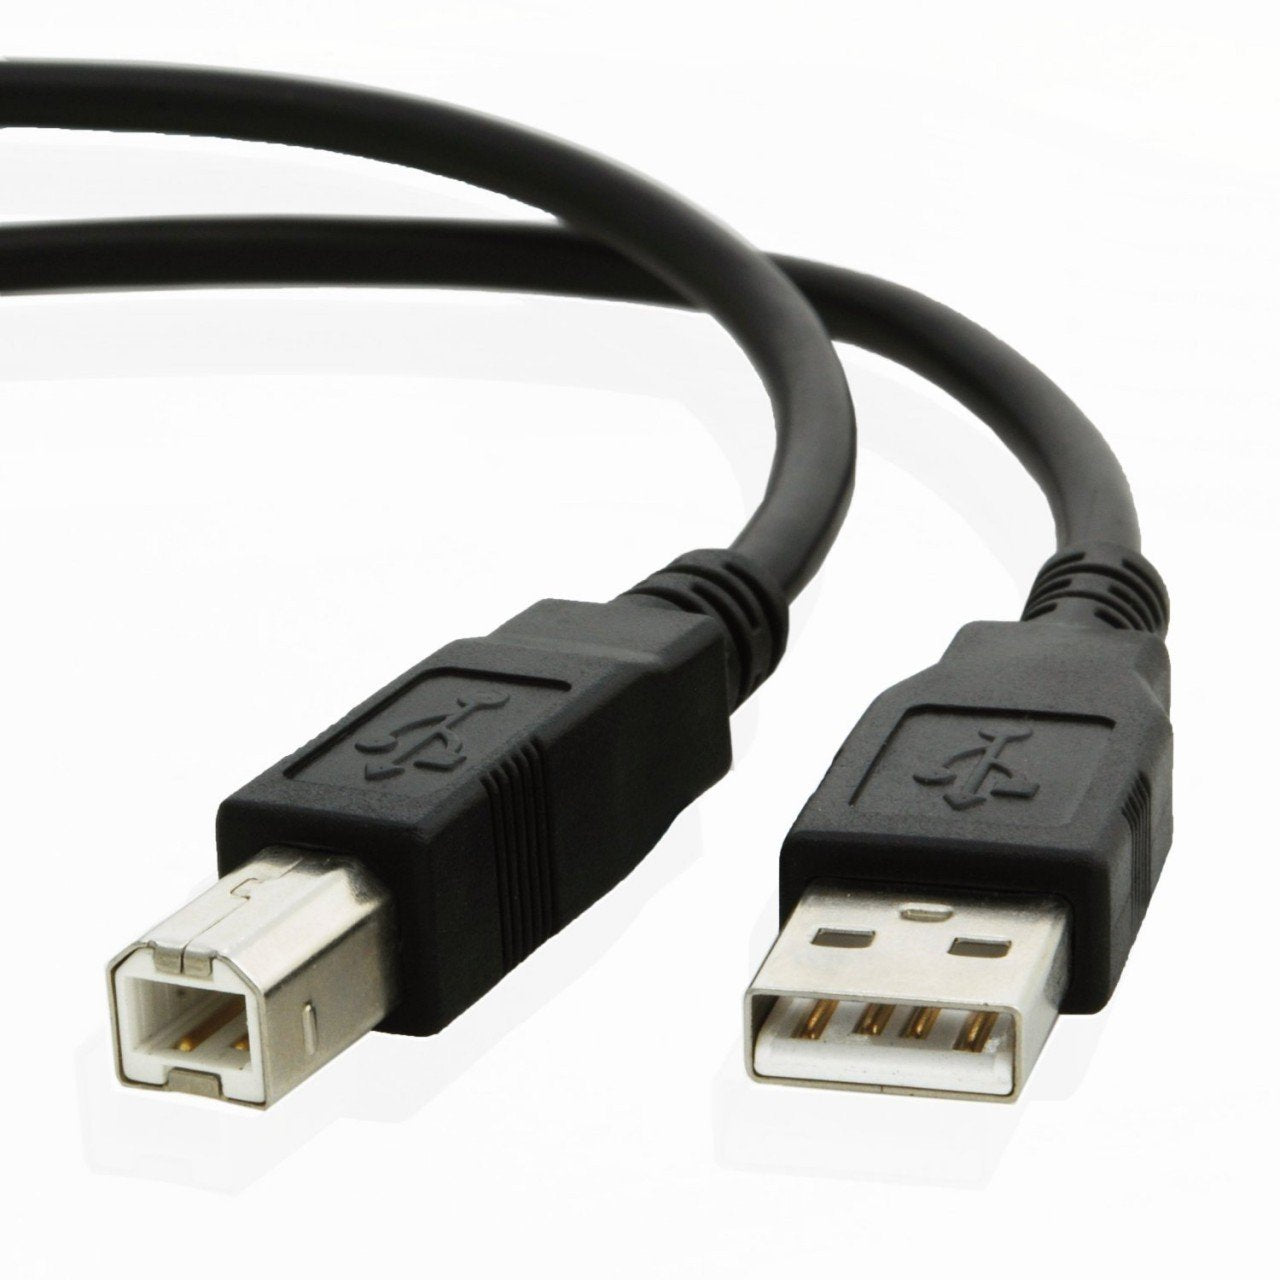 USB cable for Hp LASERJET PRO M506x